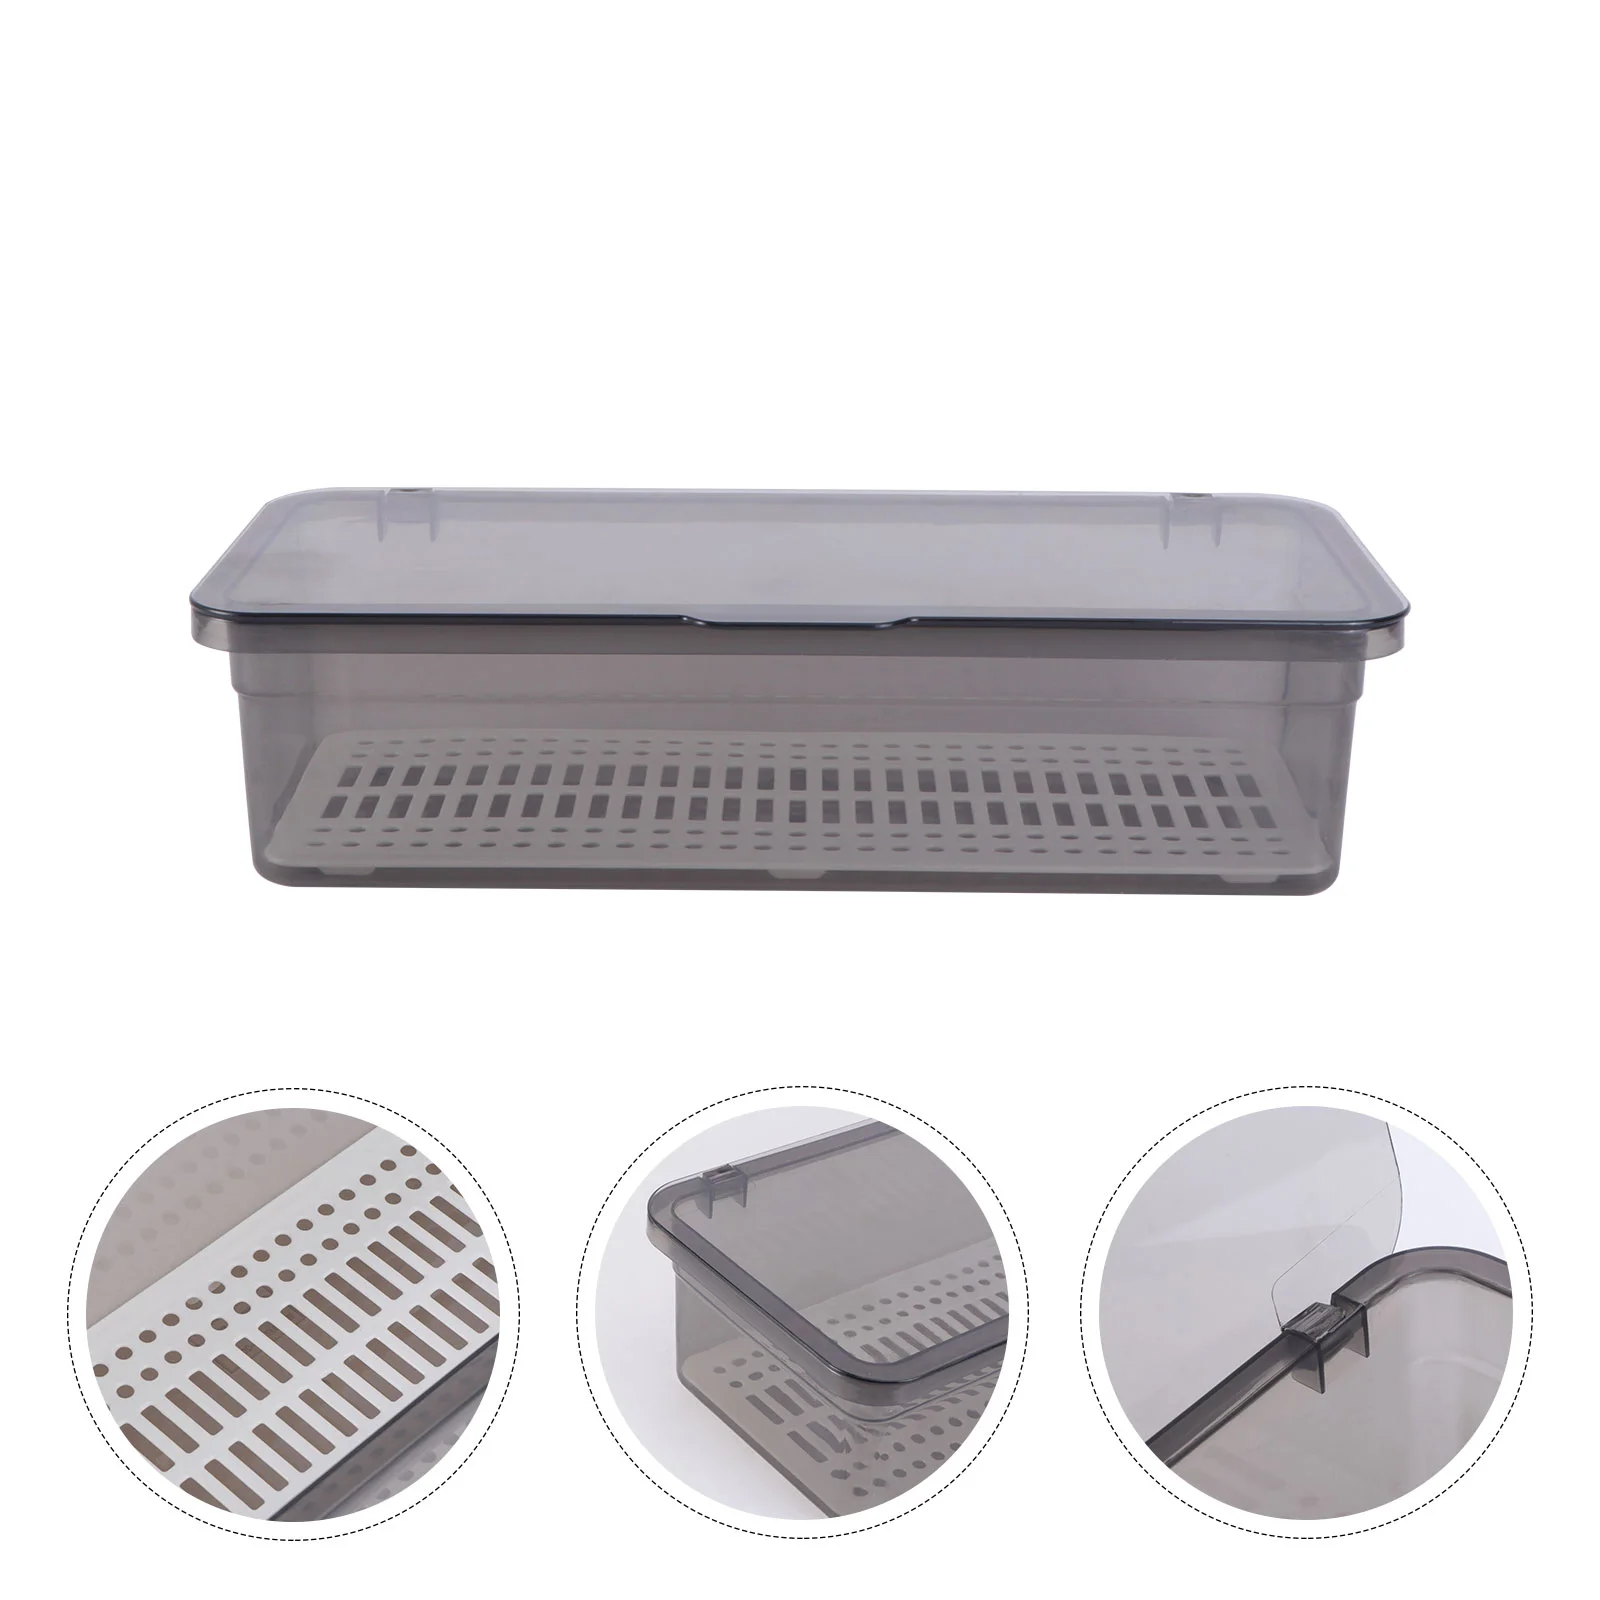 

Containers Lids Drawer Organizer Silverware Storage Box Basket Flatware Tray Cover Grilling Utensils Tableware Drainage